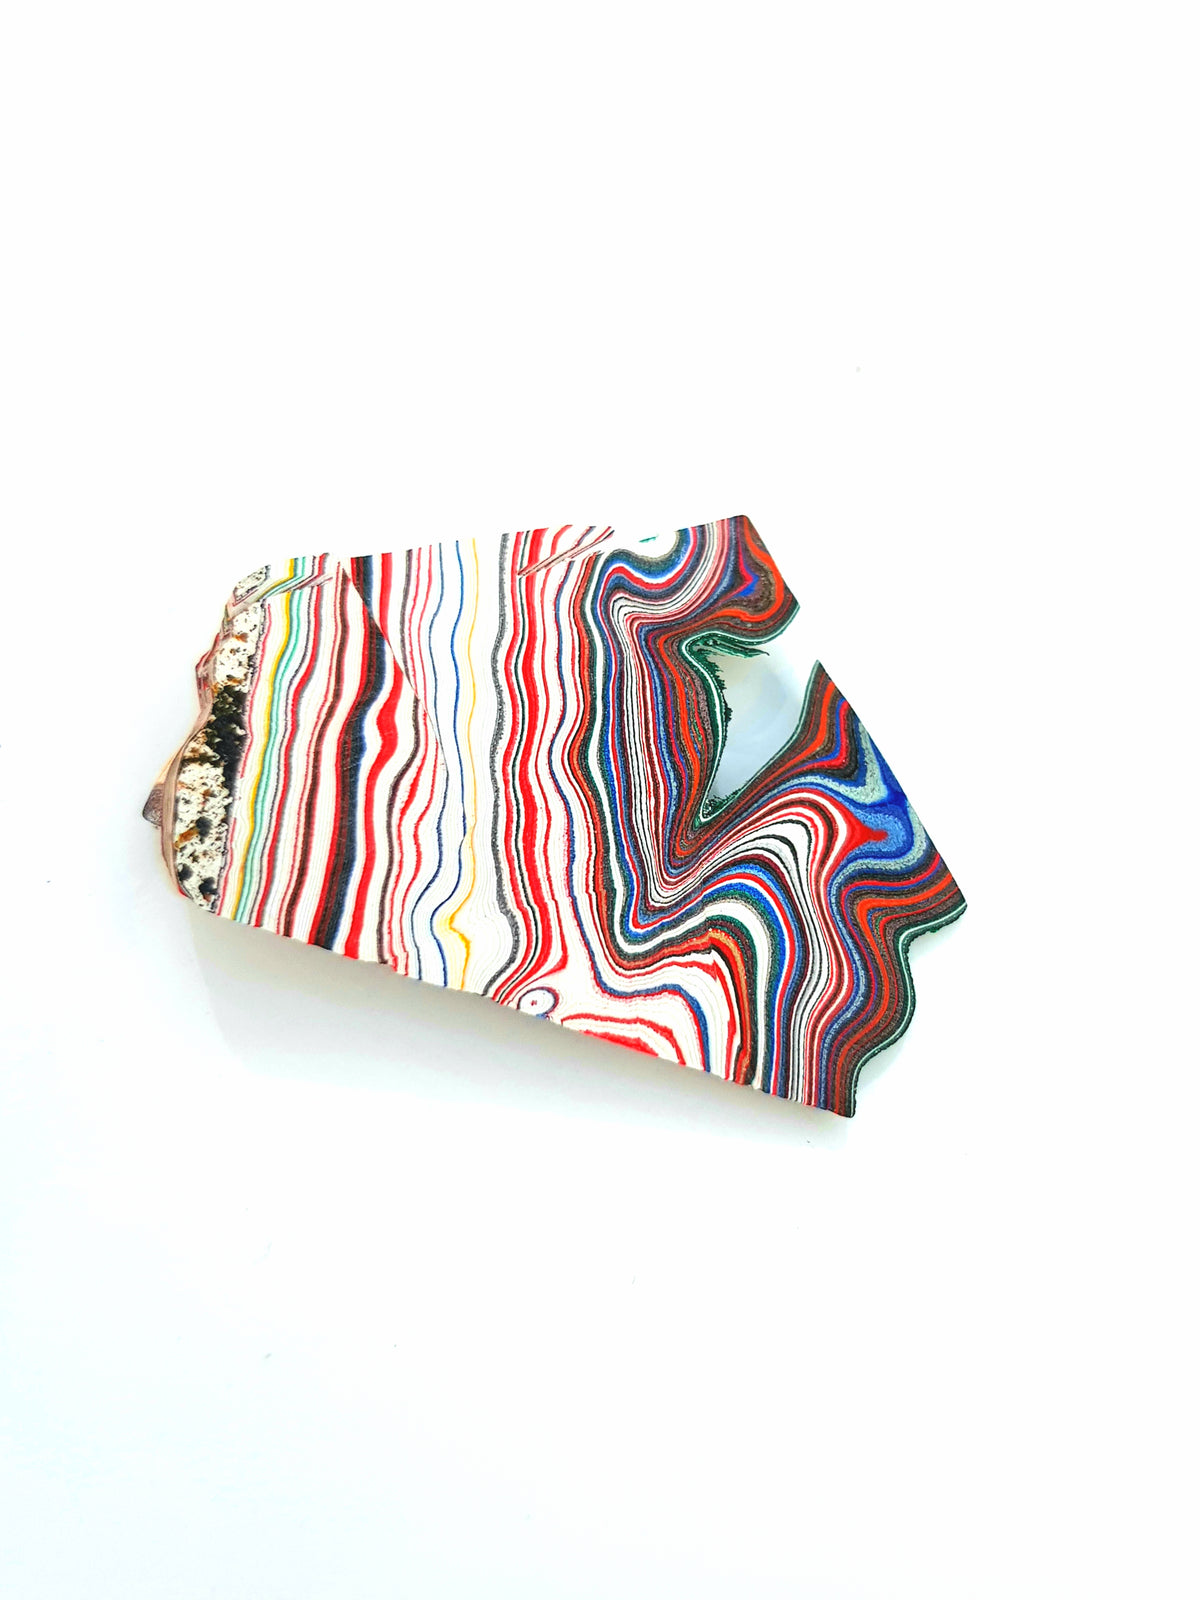 Raw fordite - The Science of Magic 